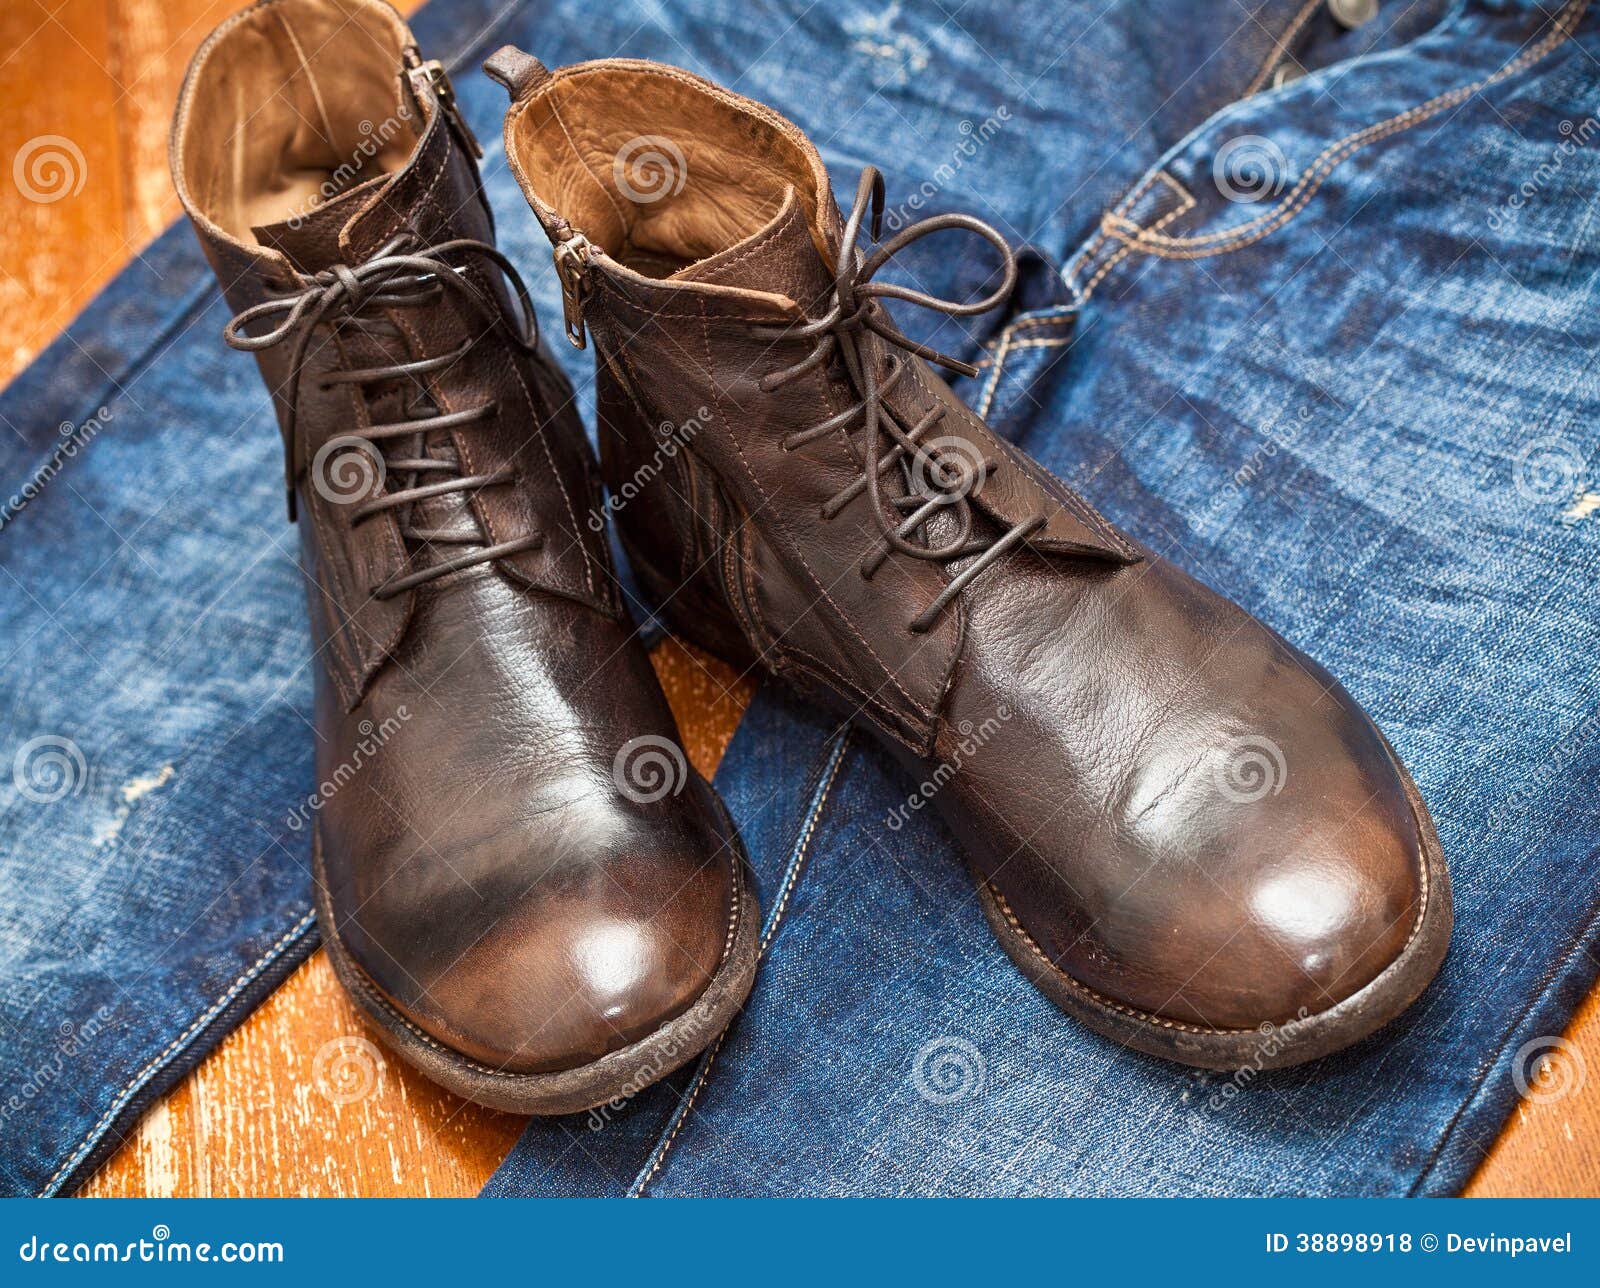 Leather Boots Brown and Blue Jeans Stock Photo - Image of jeans ...